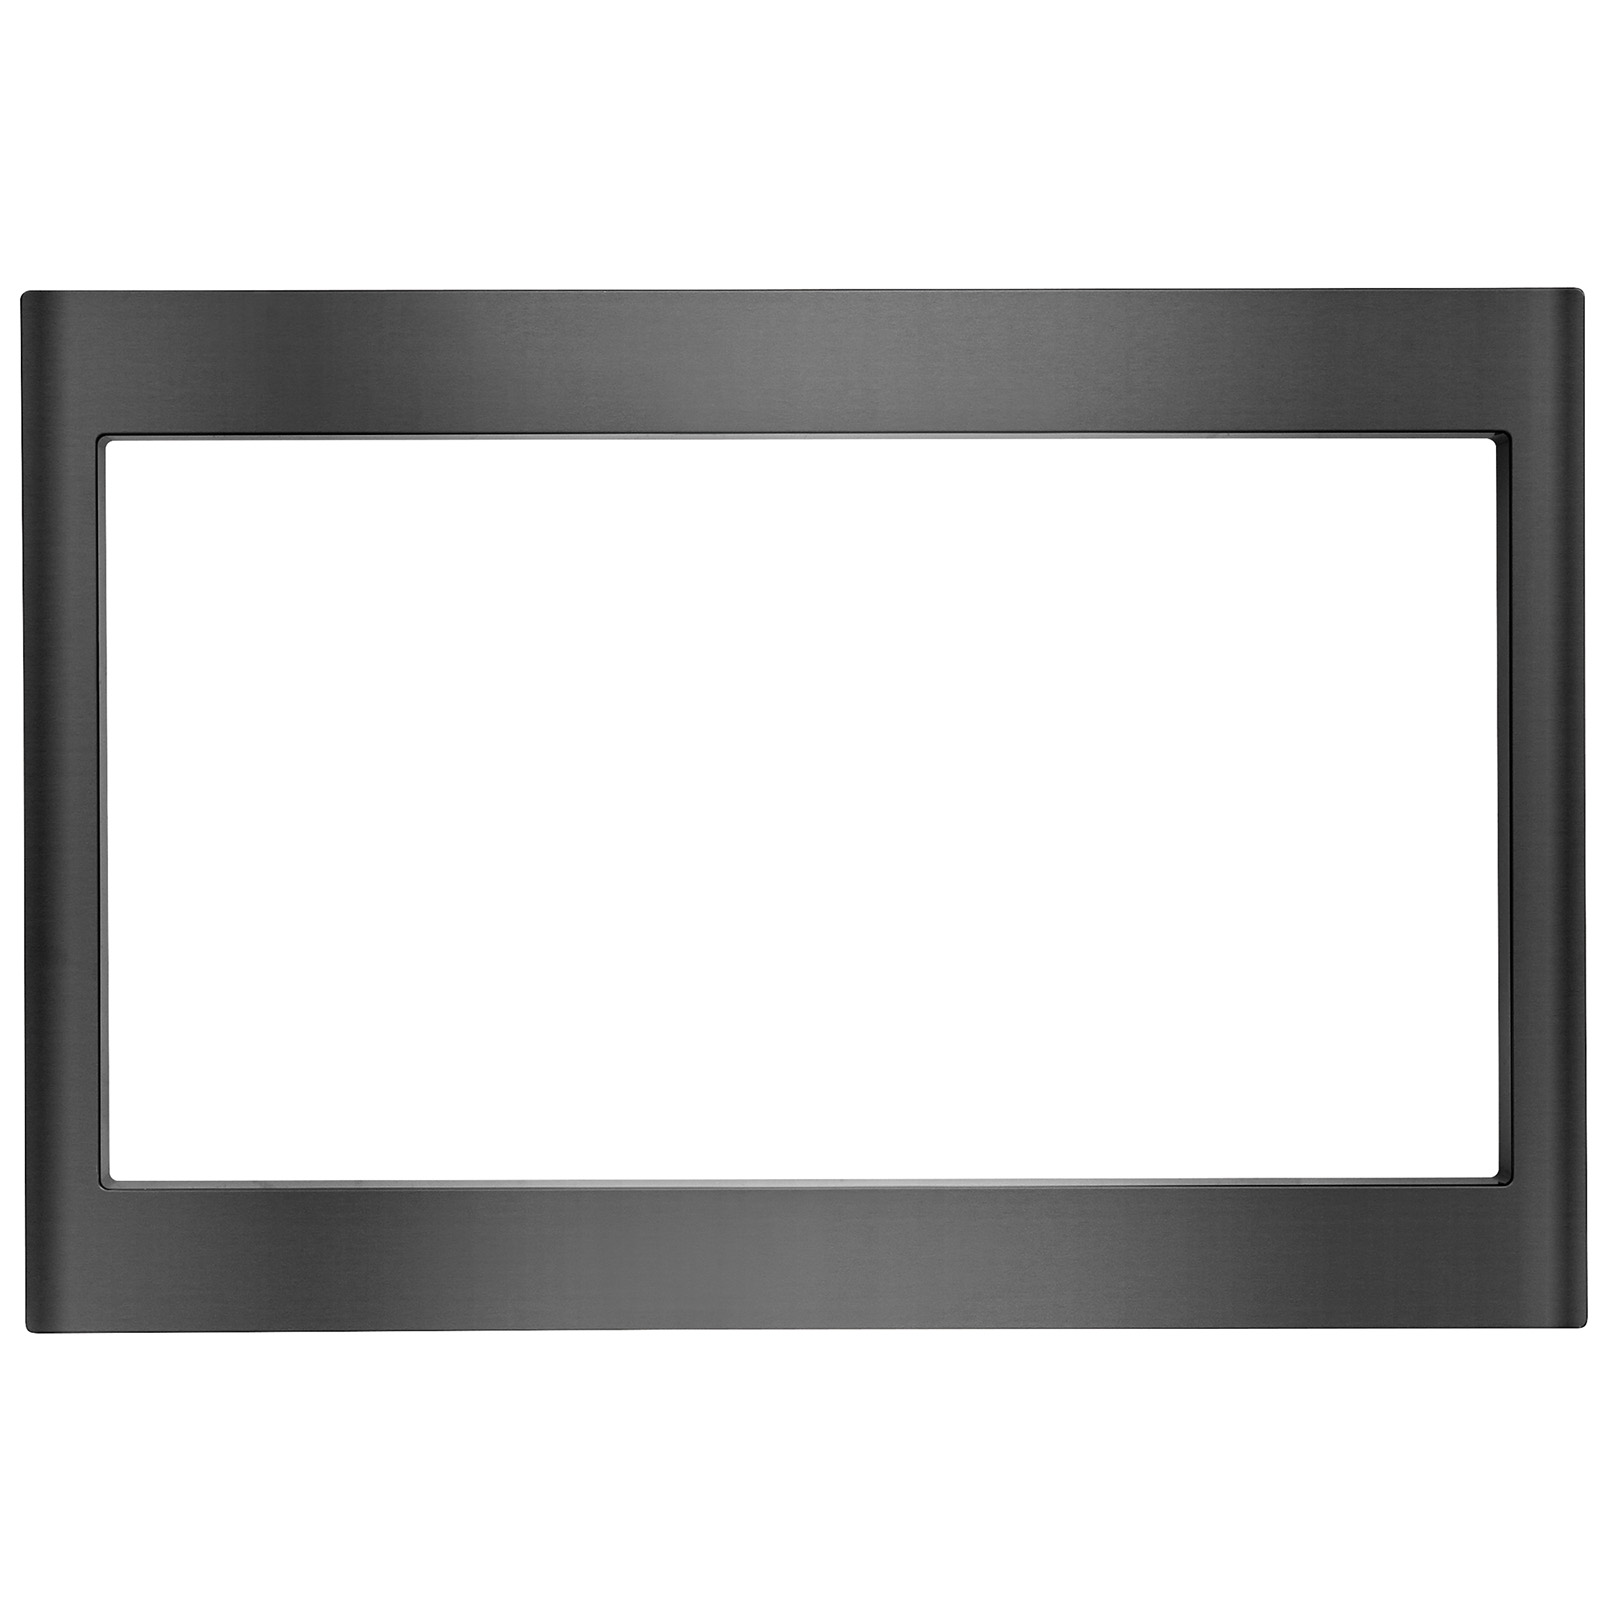 Frigidaire MWTK27FGUD  27'' Trim Kit for Built-In Microwave Oven  &#8211; Black Stainless Steel